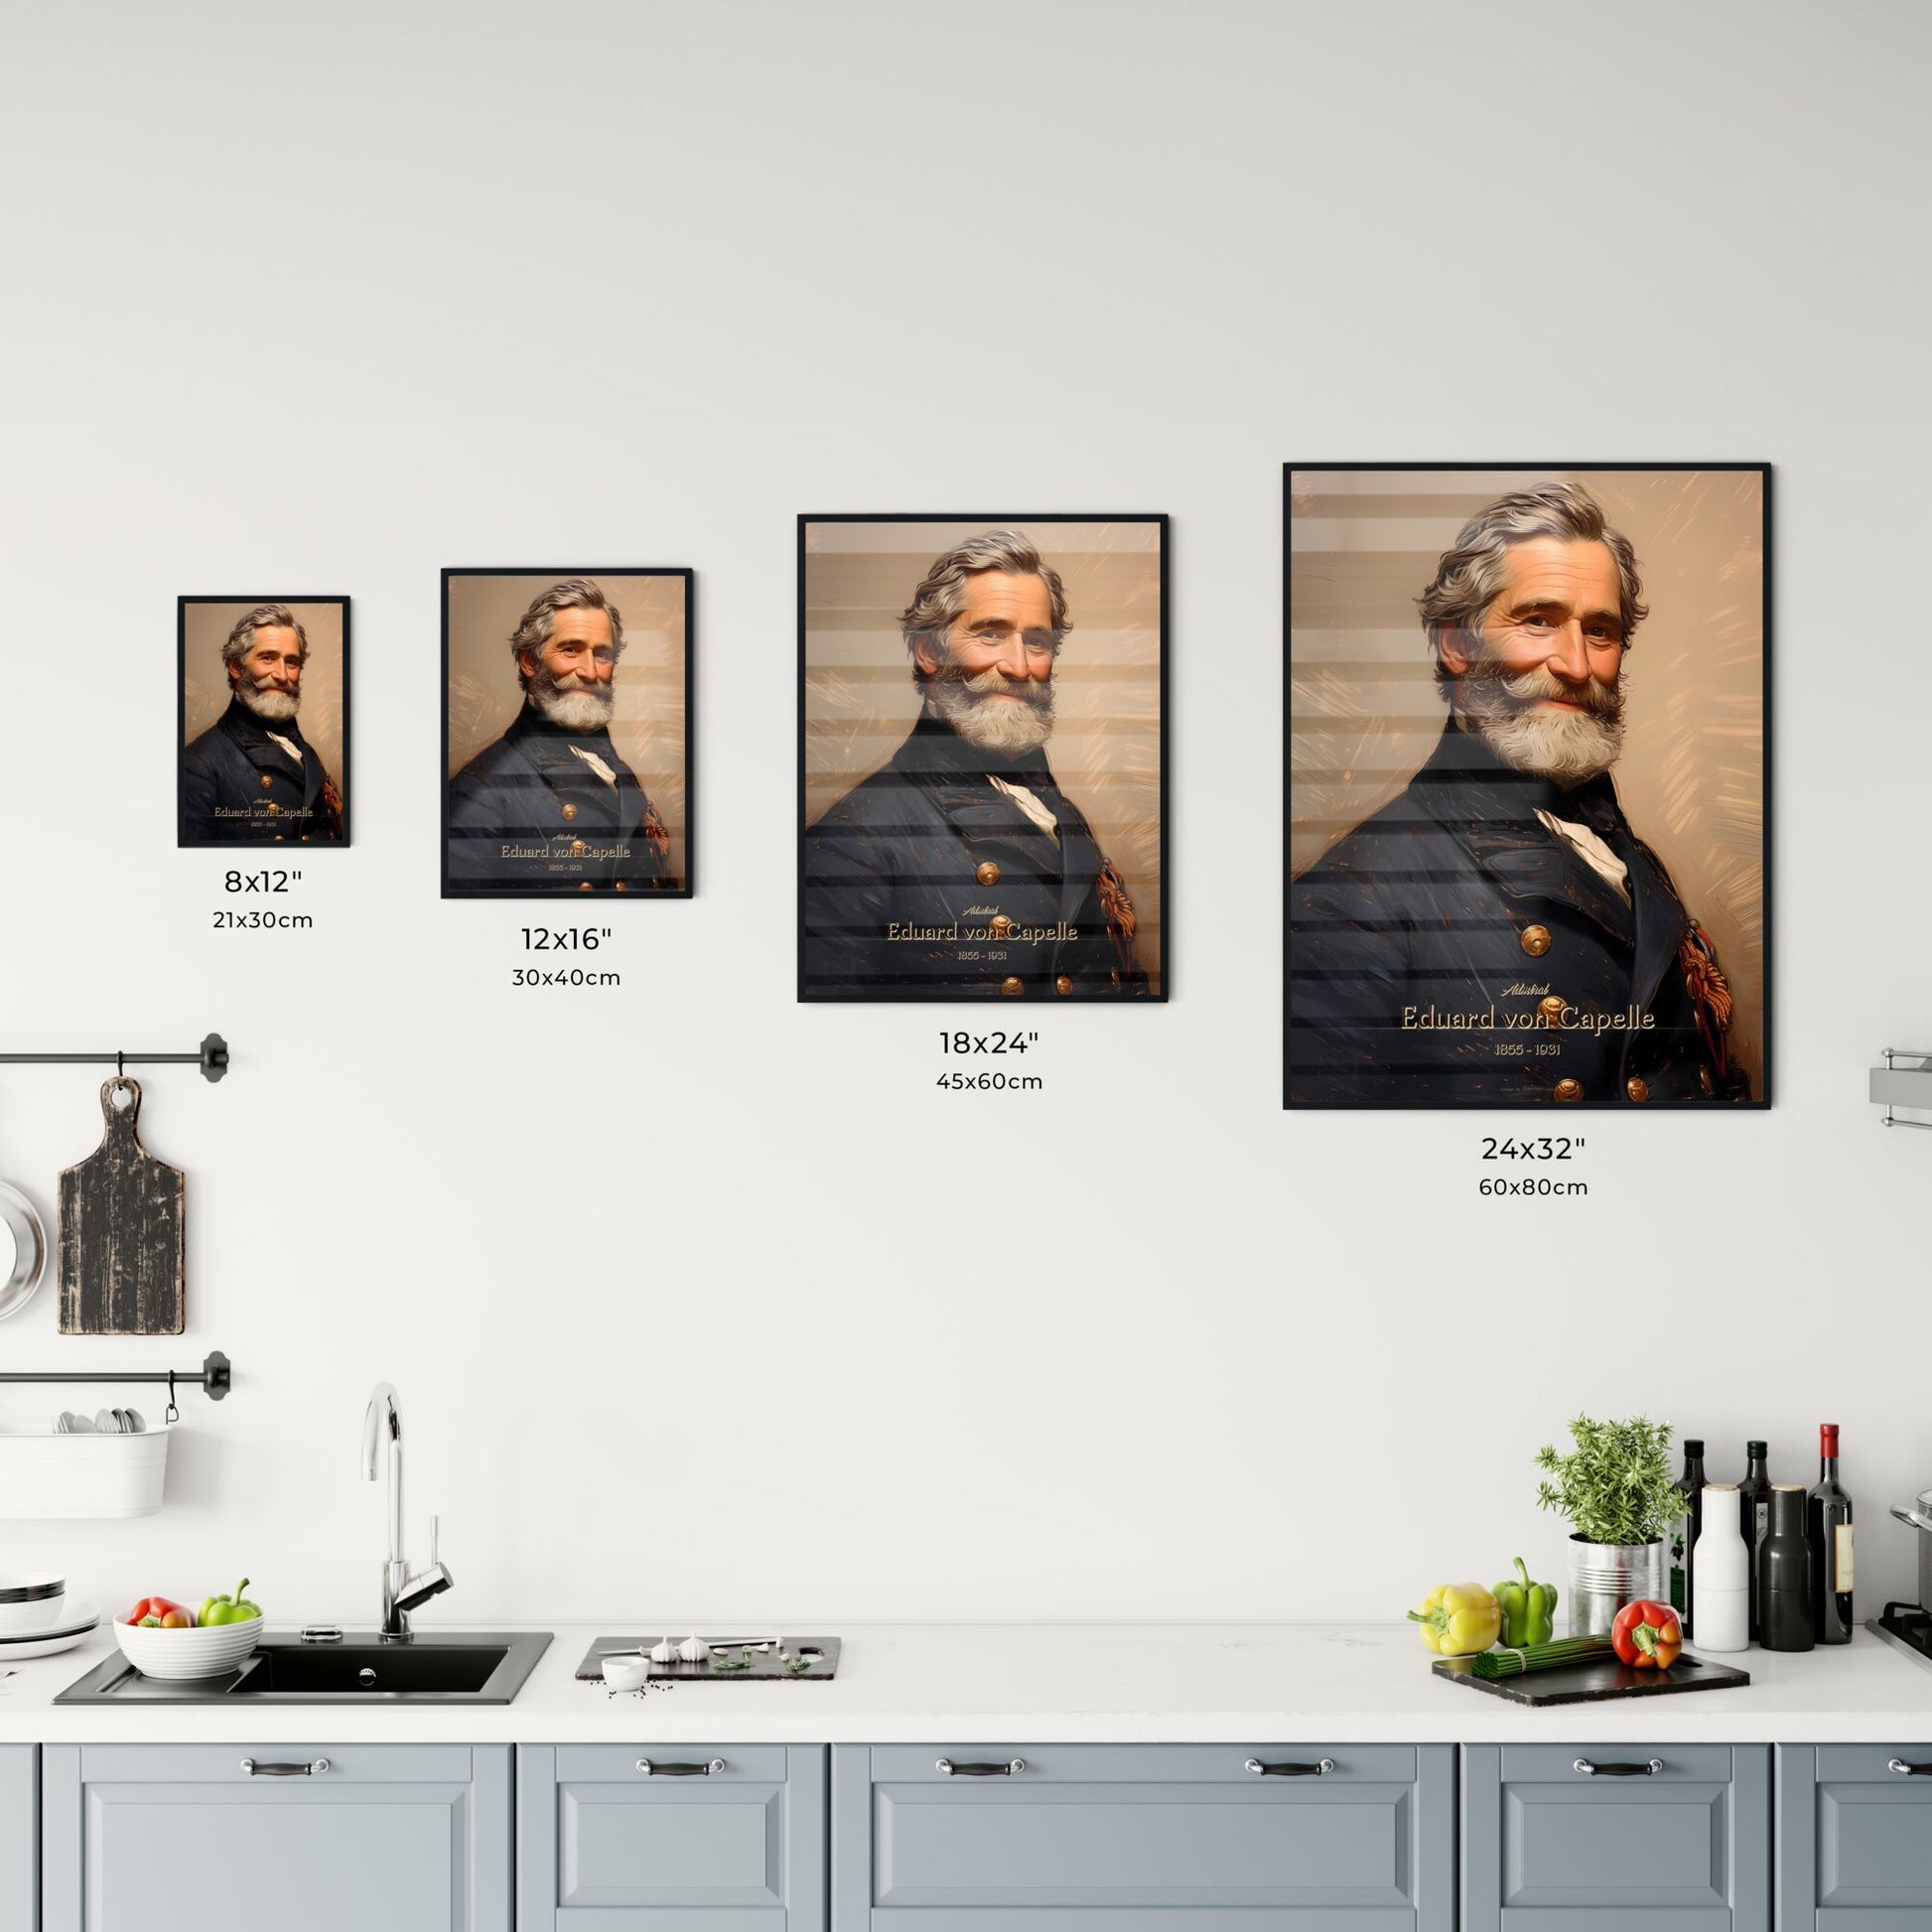 Admiral, Eduard von Capelle, 1855 - 1931, A Poster of a man with a beard and mustache wearing a military uniform Default Title